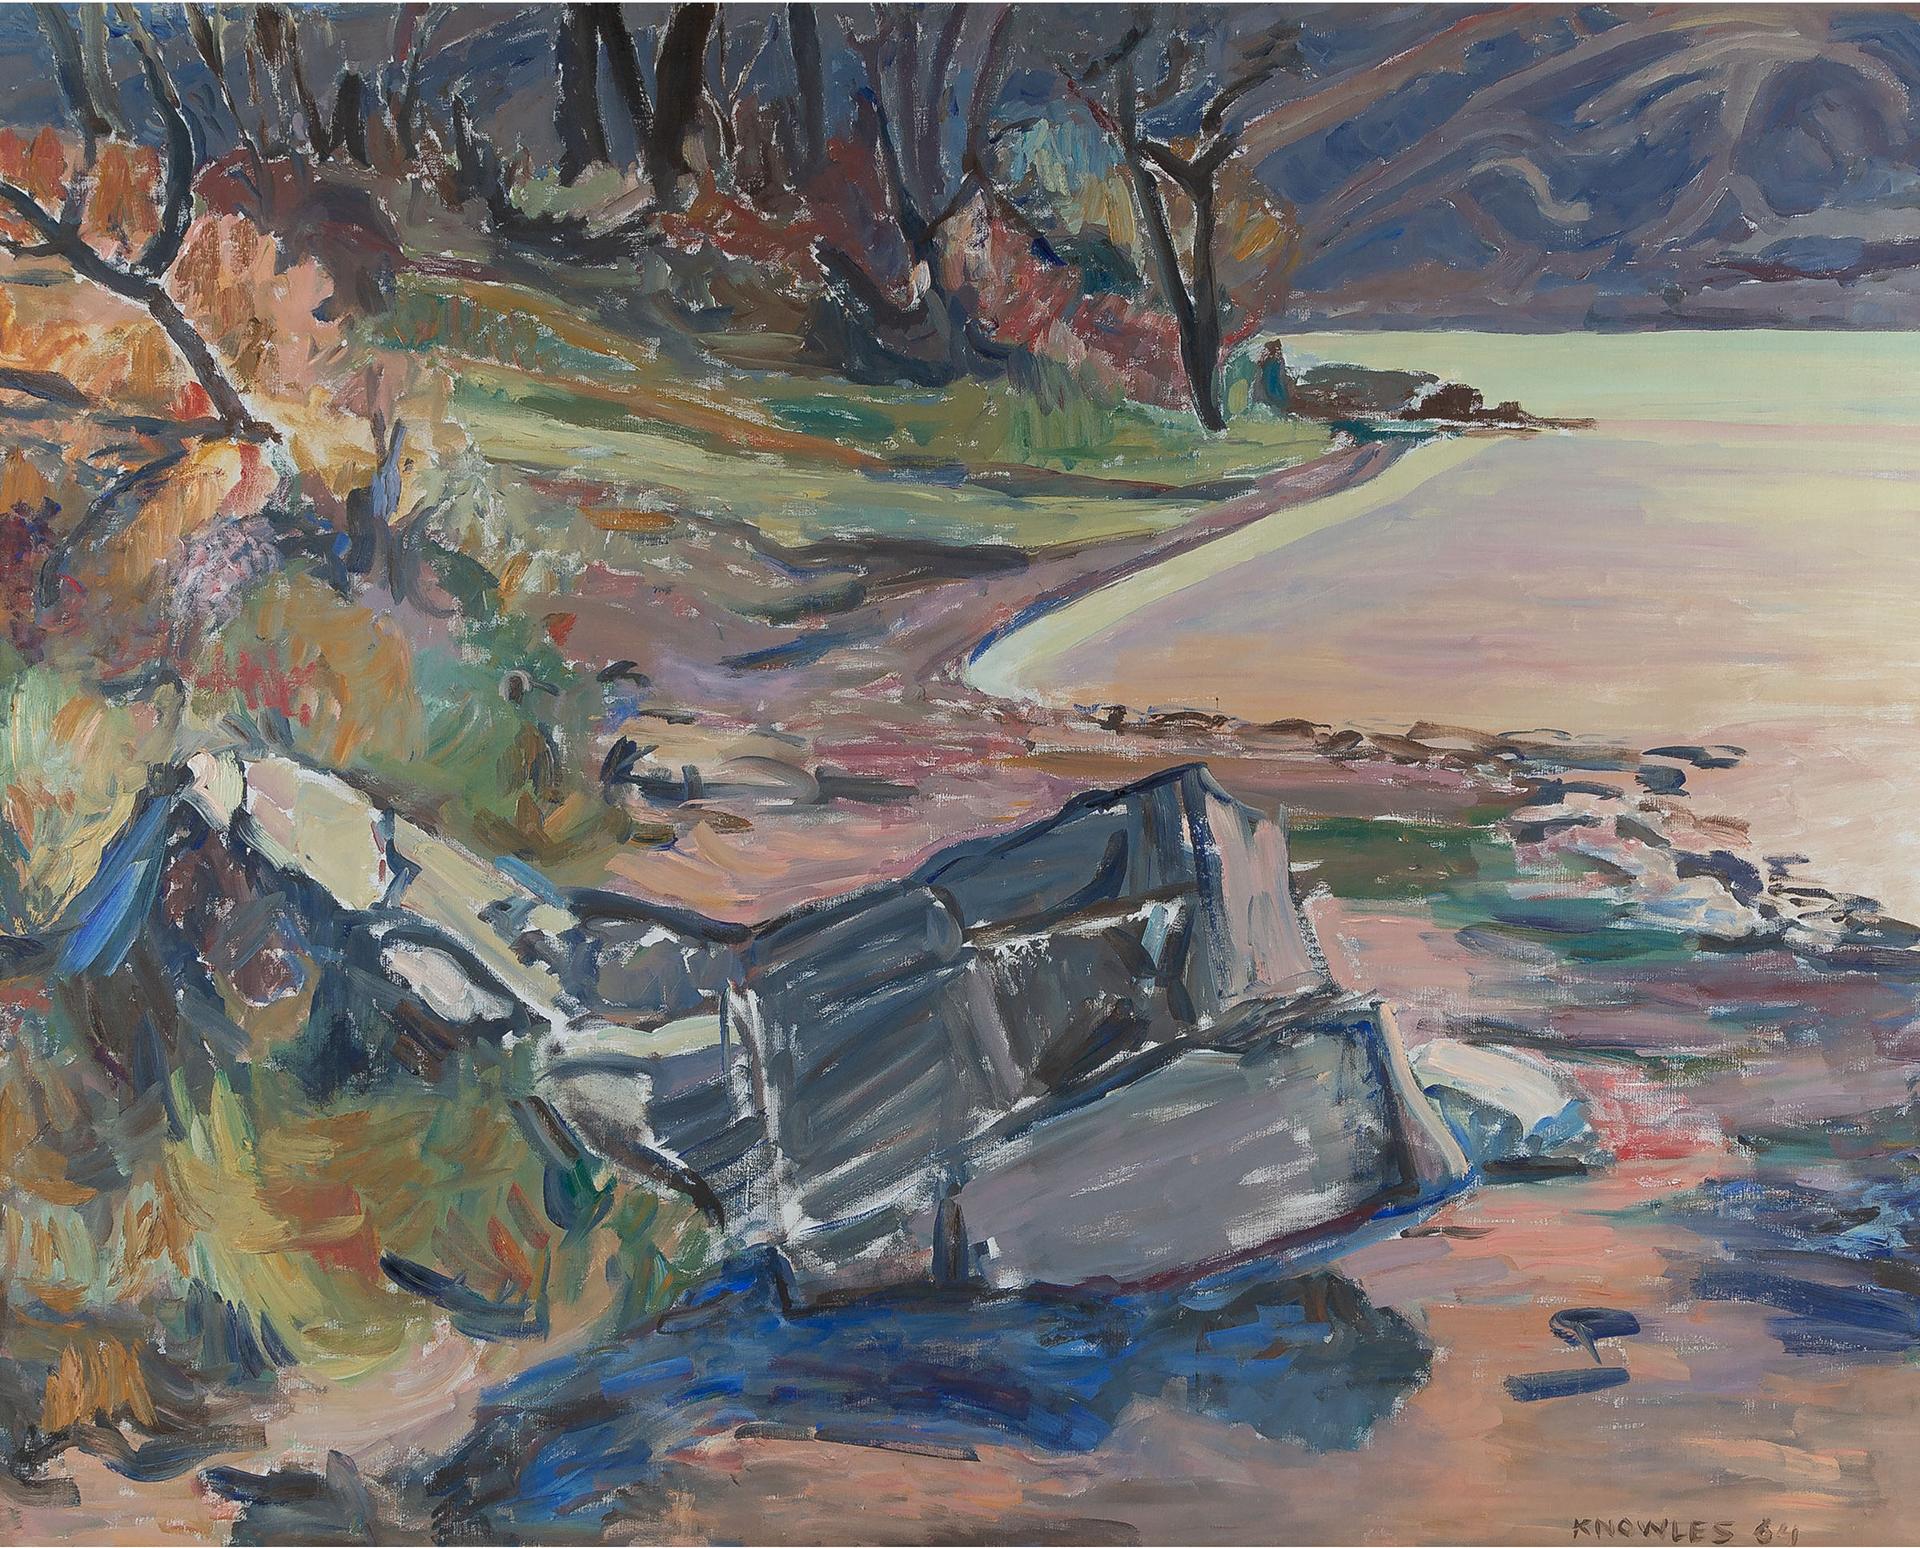 Dorothy Elsie Knowles (1927-2001) - Views Of The Qu'appelle Valley, Rocks On The Lakeshore, 1963